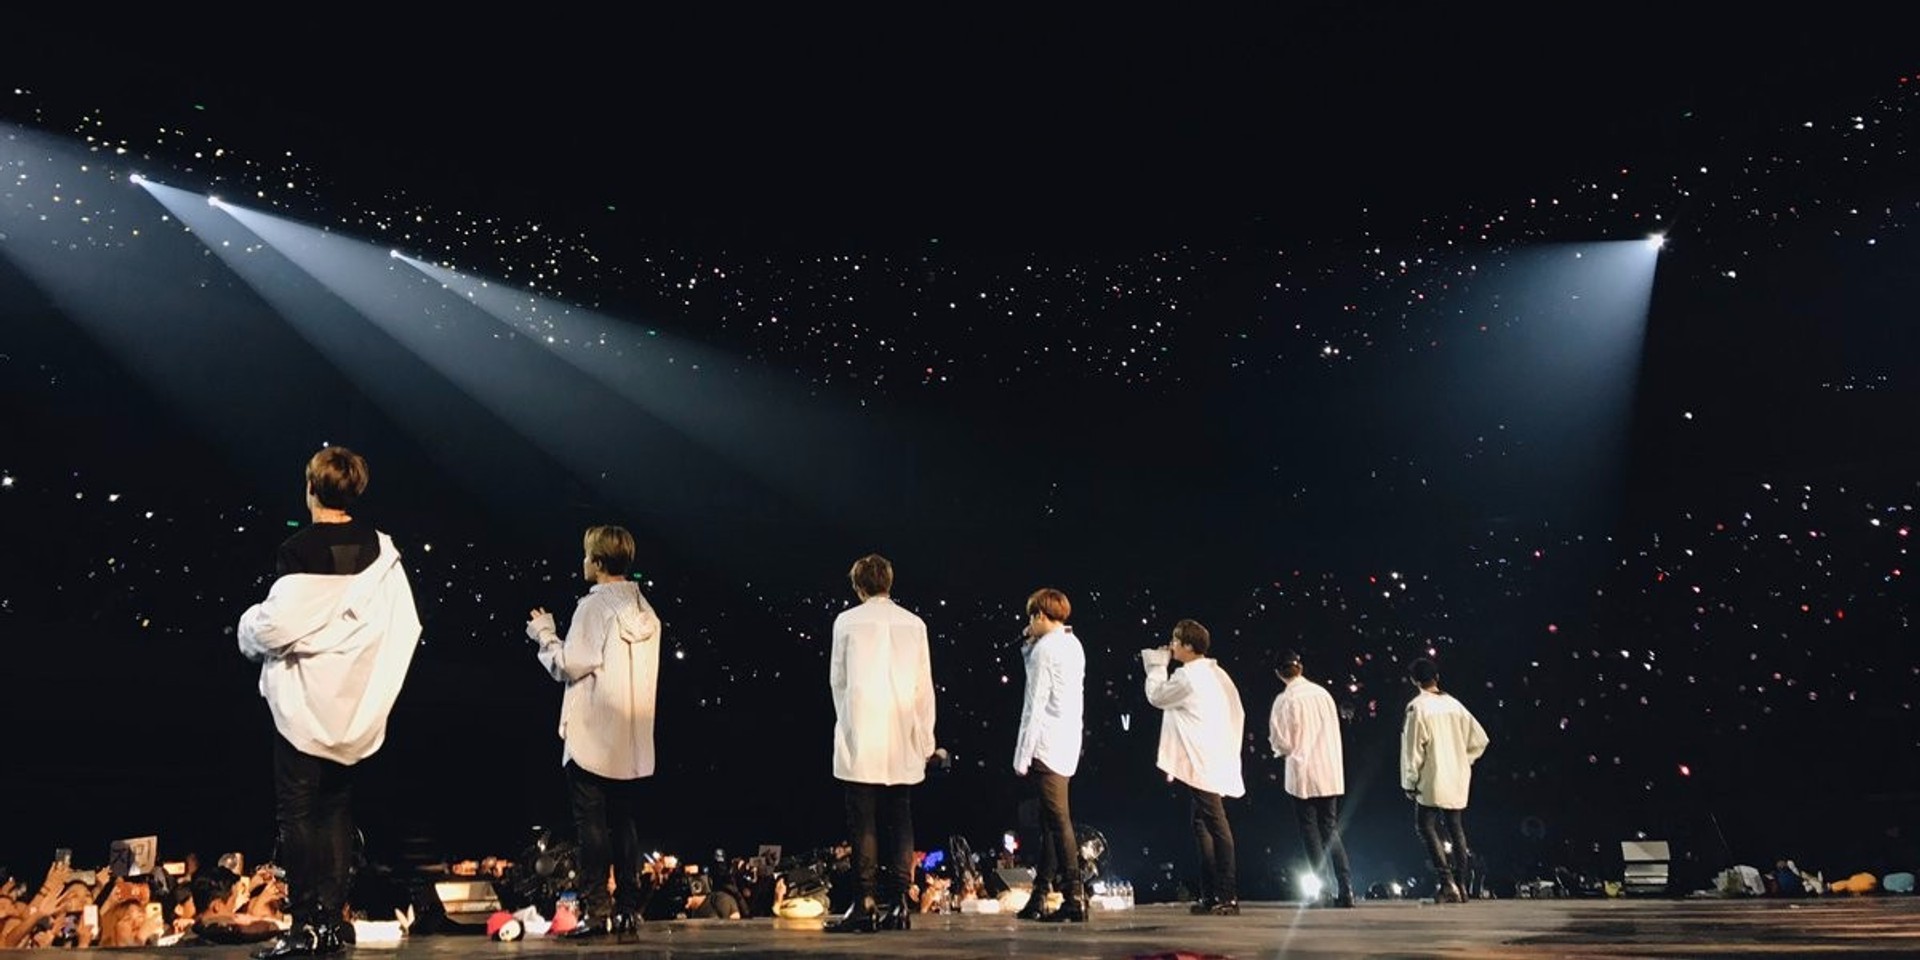 BTS' WINGS Tour in Manila unites A.R.M.Y.s from all over the world to spread their wings and fly